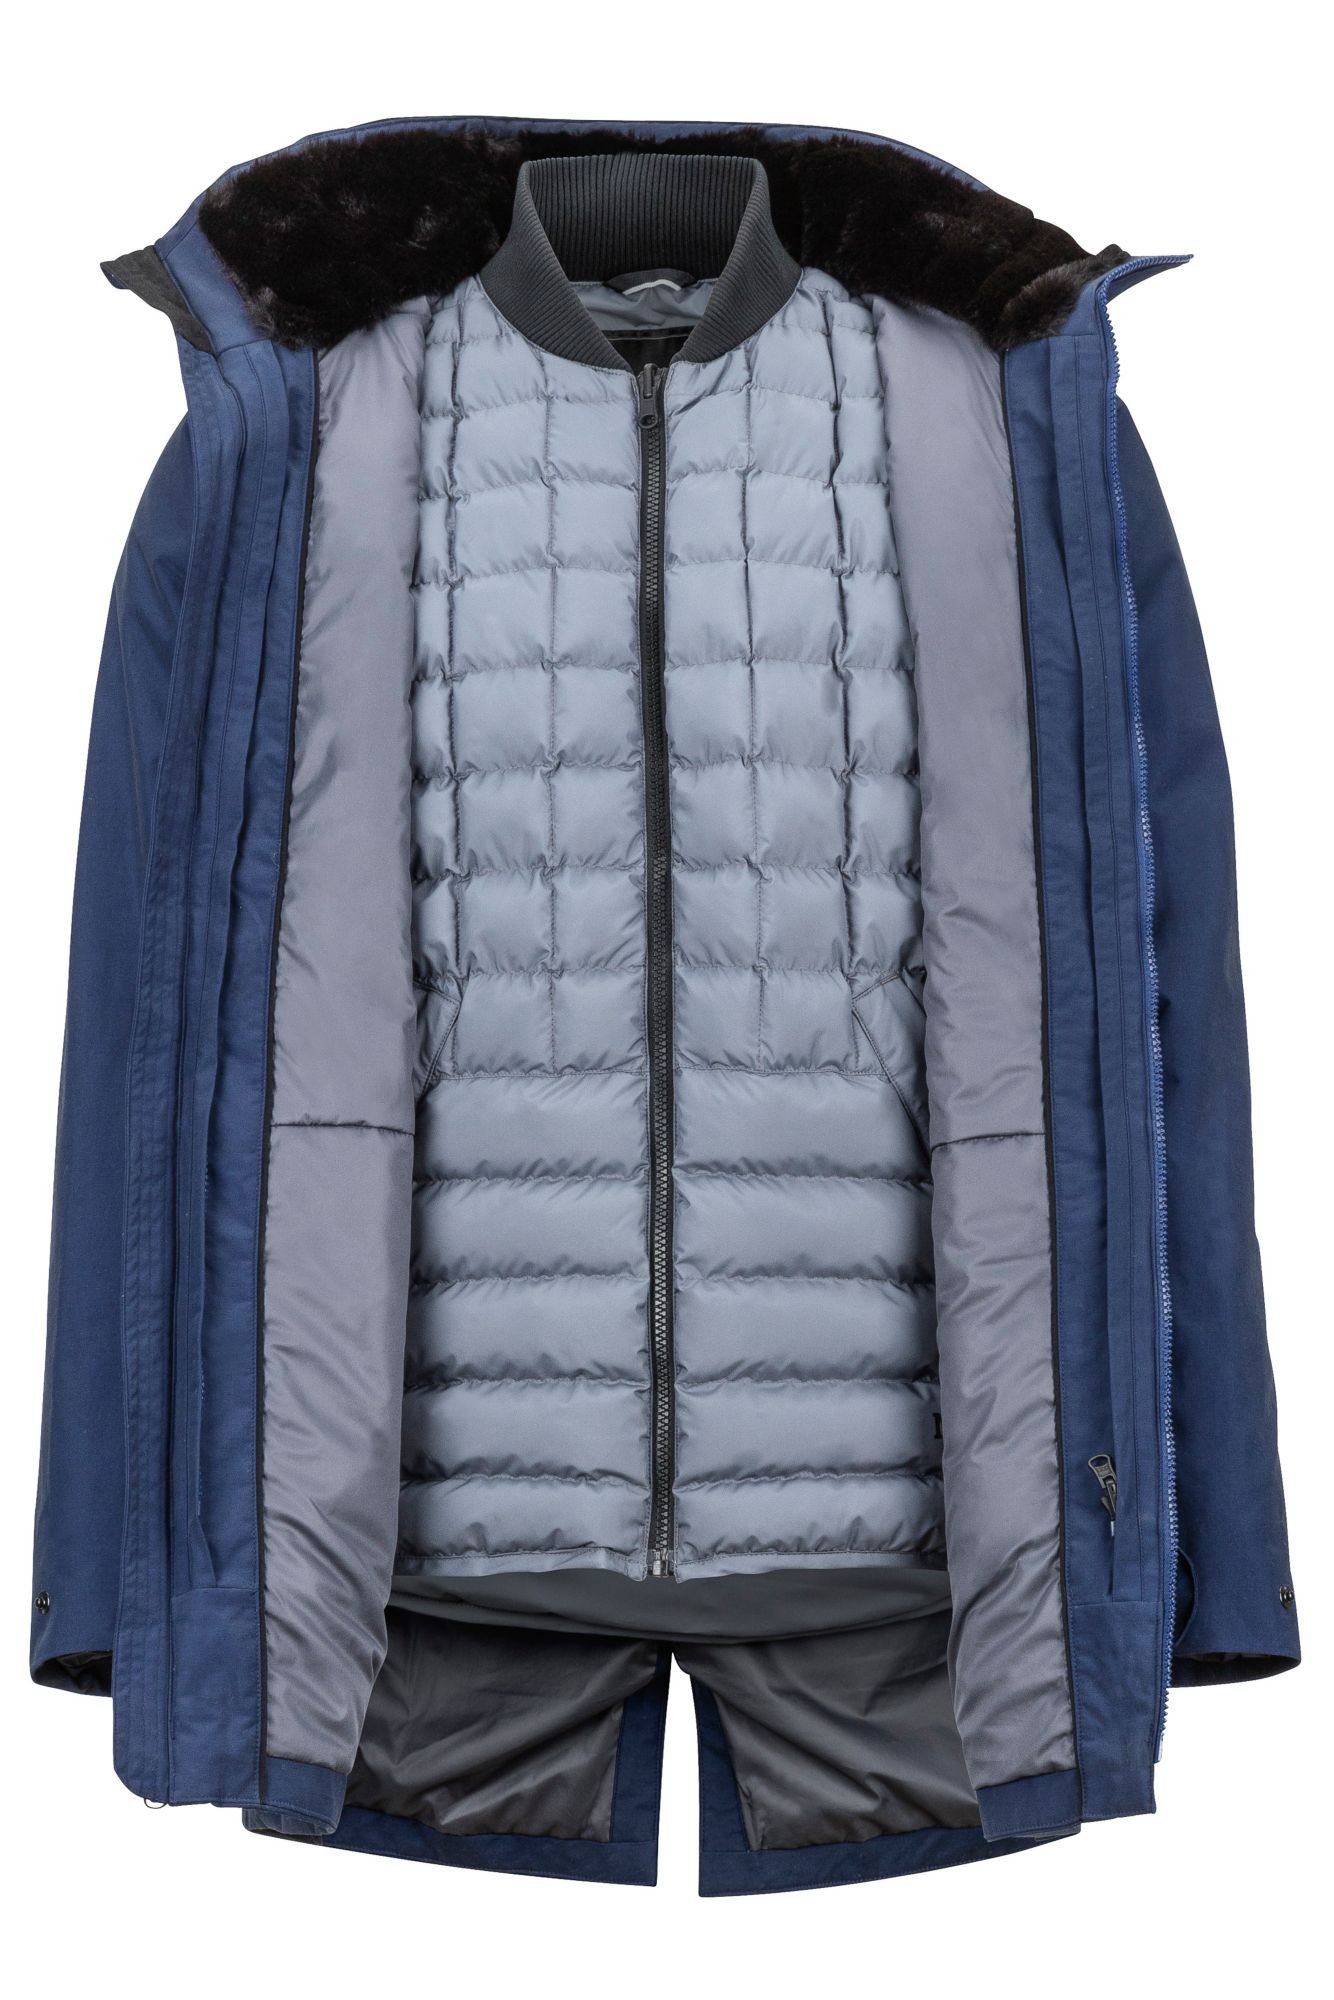 Men's Drake Passage Featherless Component 3-in-1 Jacket